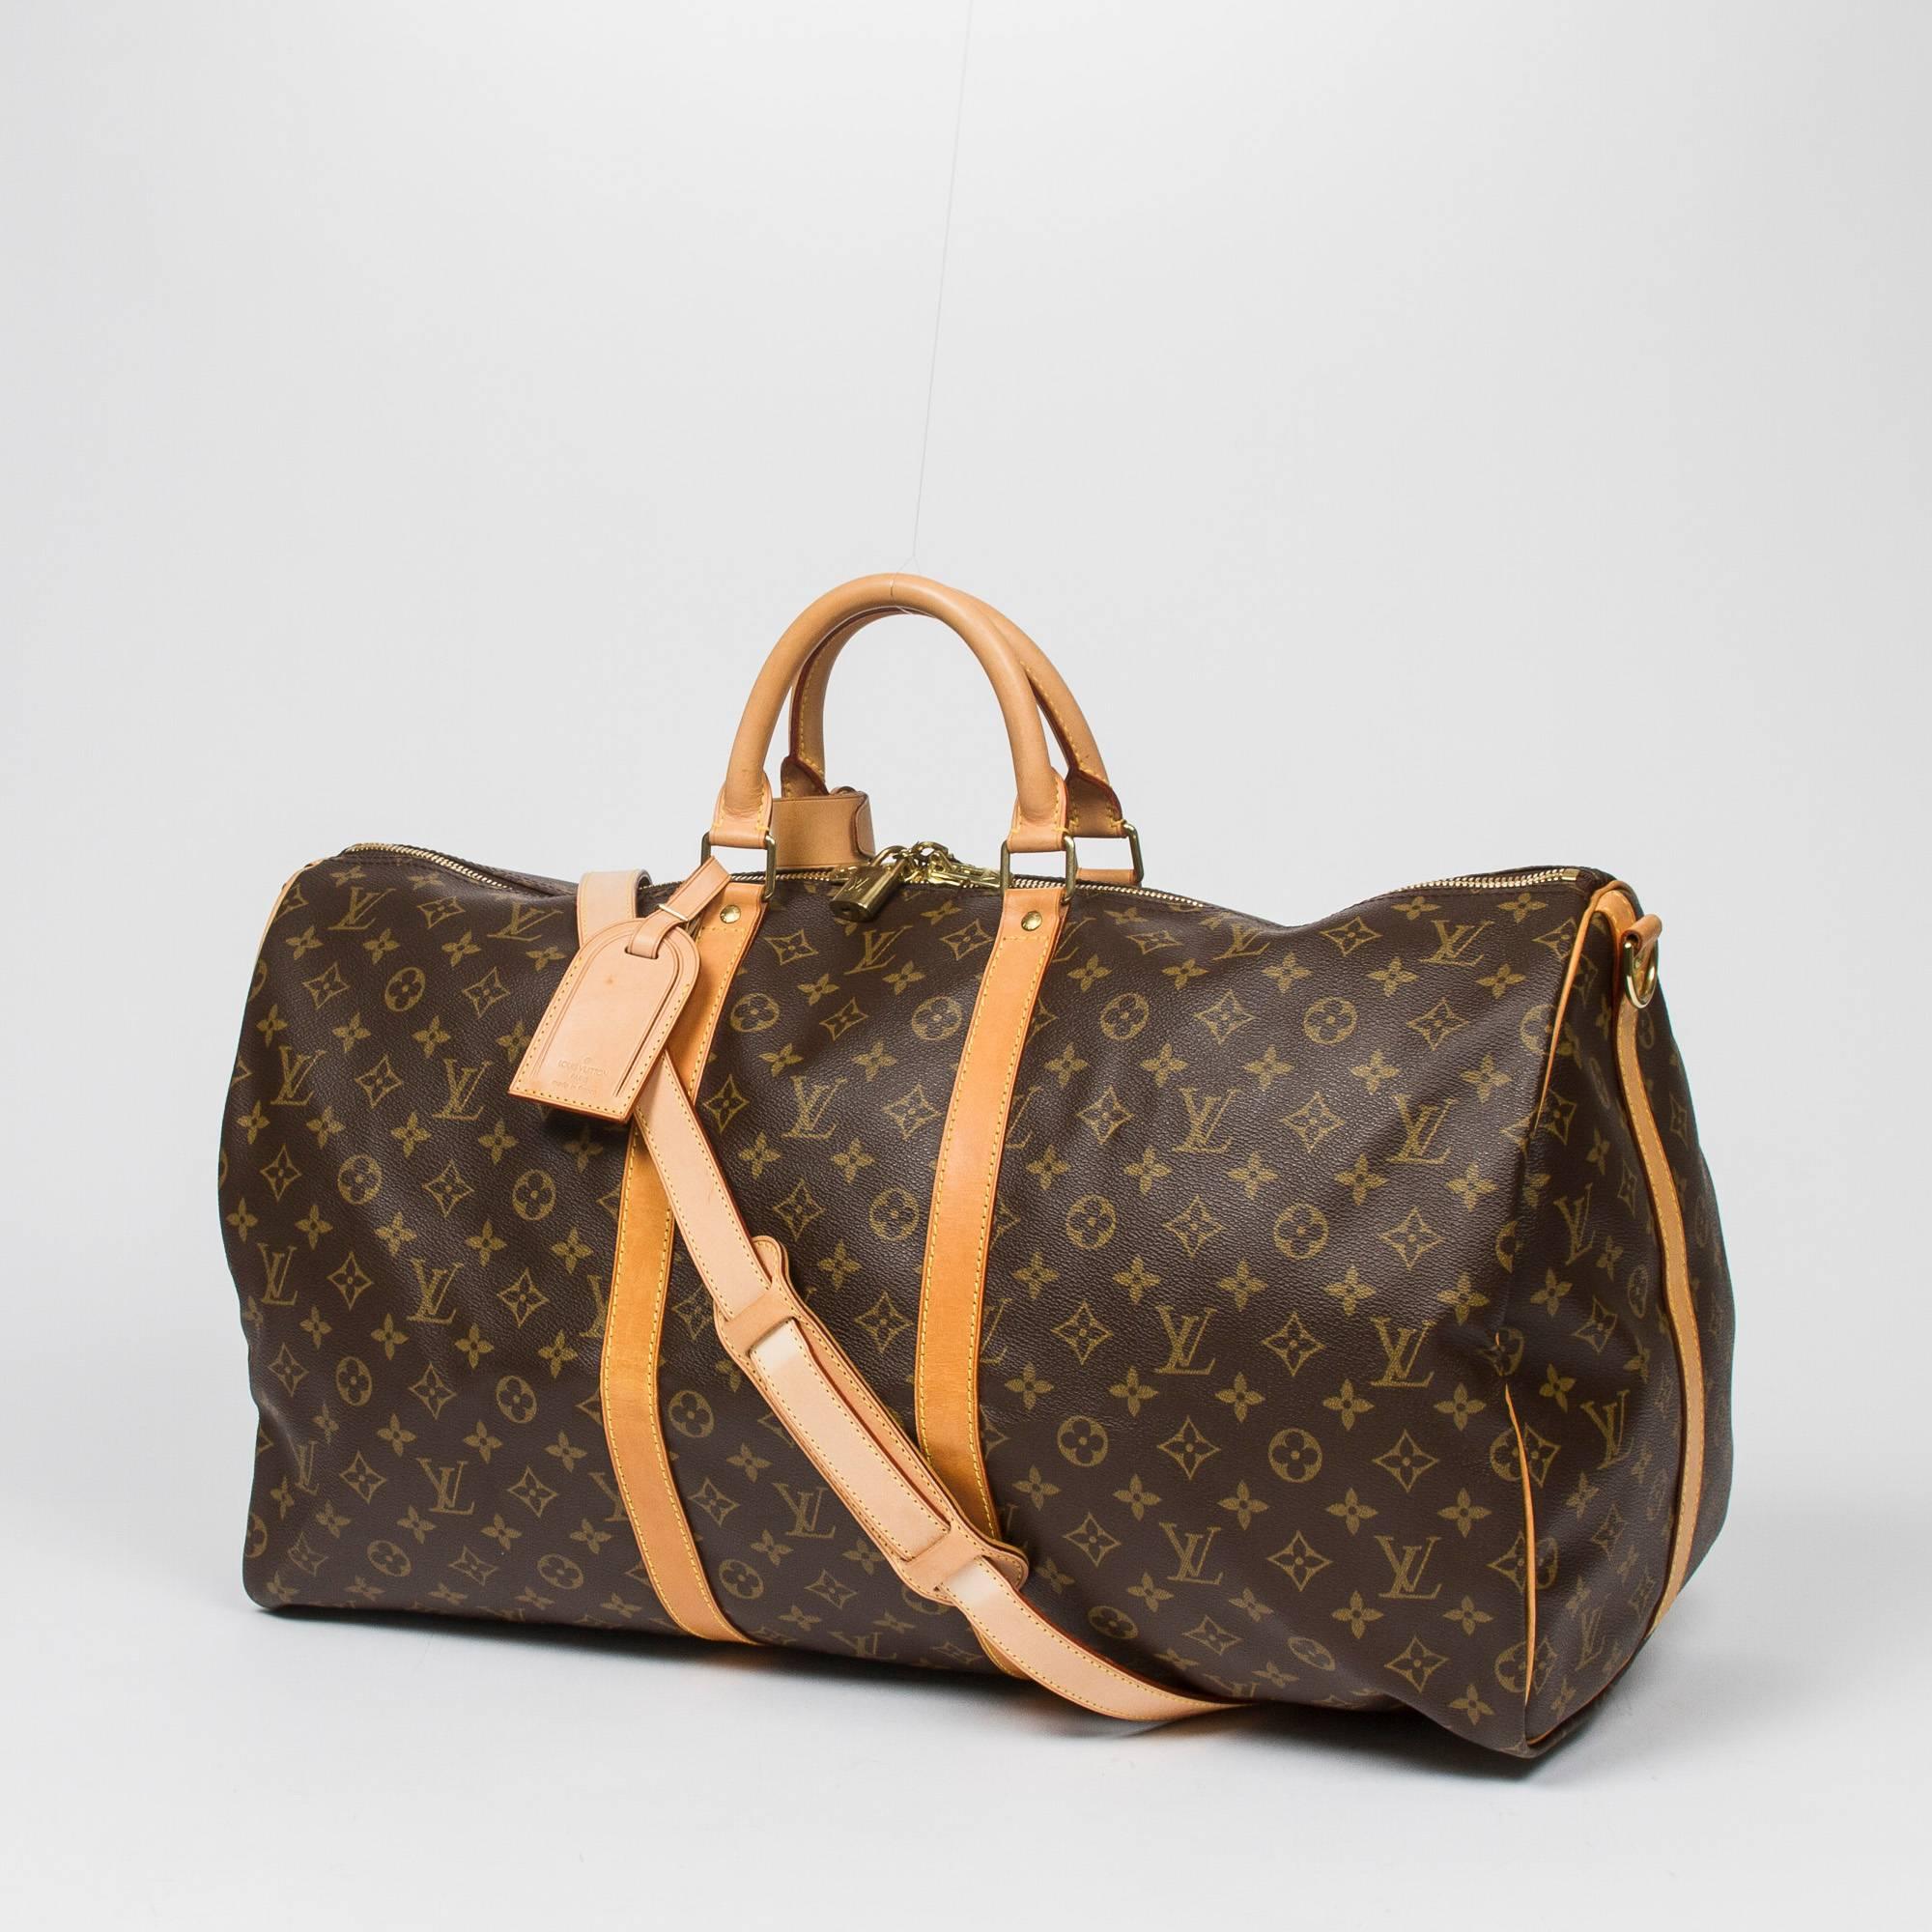 Keepall Bandouliere 55 in monogram canvas, vachetta leather shoulder strap handles and trimmings. Golden brass hardware. Double zipper closure. Brown canvas lining. Luggage tag, handle strap, cadenas and keys included. Date code MB0011. Model from